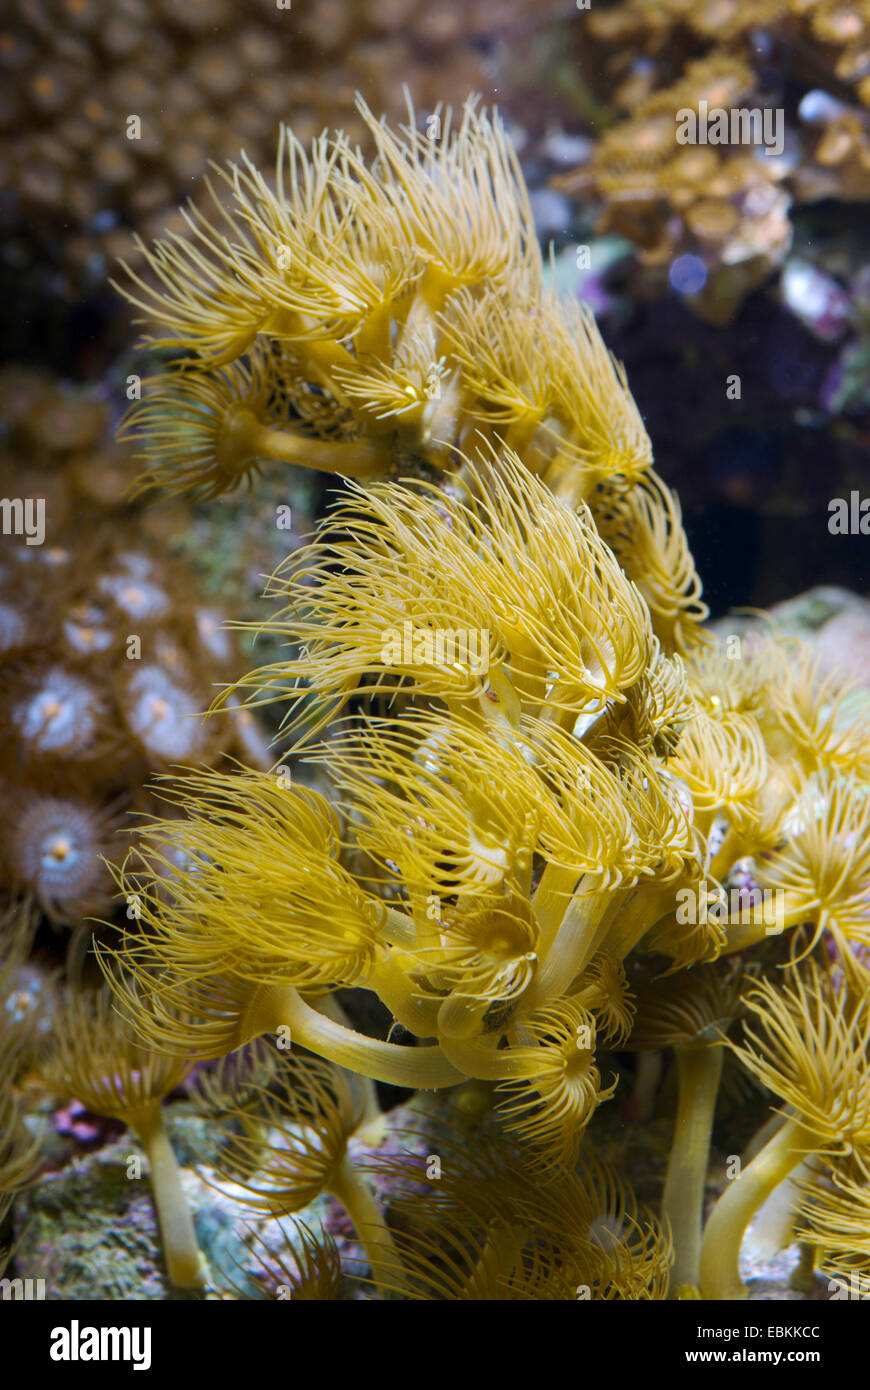 yellow commensal zoanthid, yellow encrusting sea anemone (Parazoanthus axinellae), colony Stock Photo